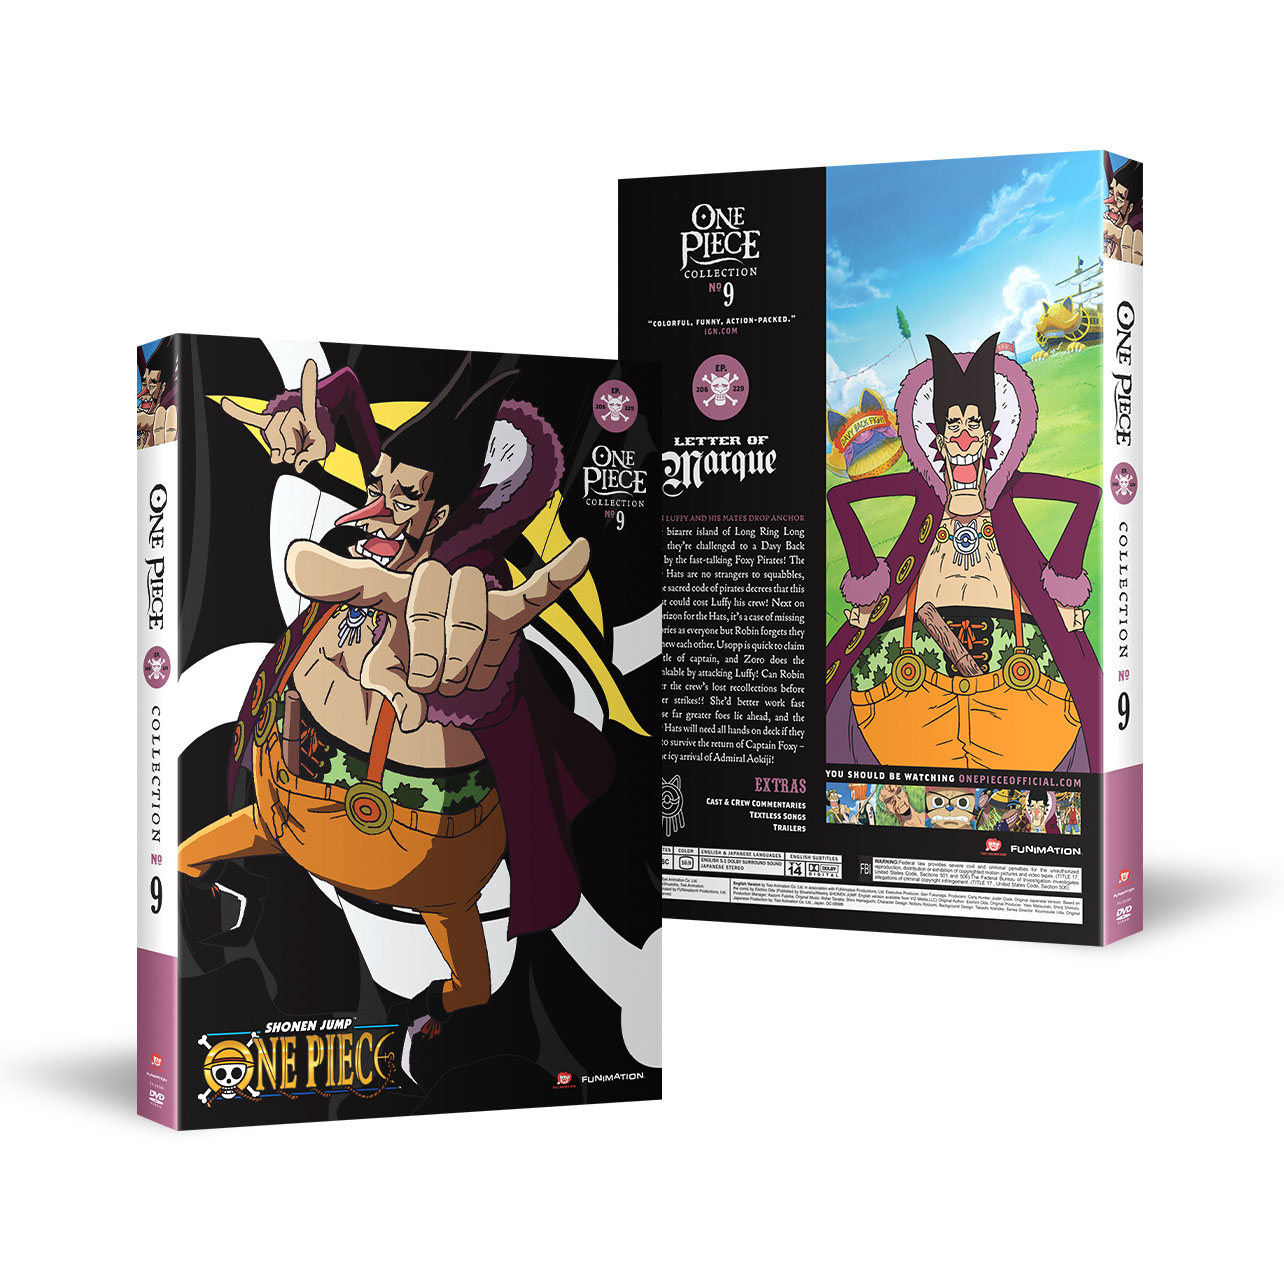 One Piece - Collection 9 - DVD image count 0